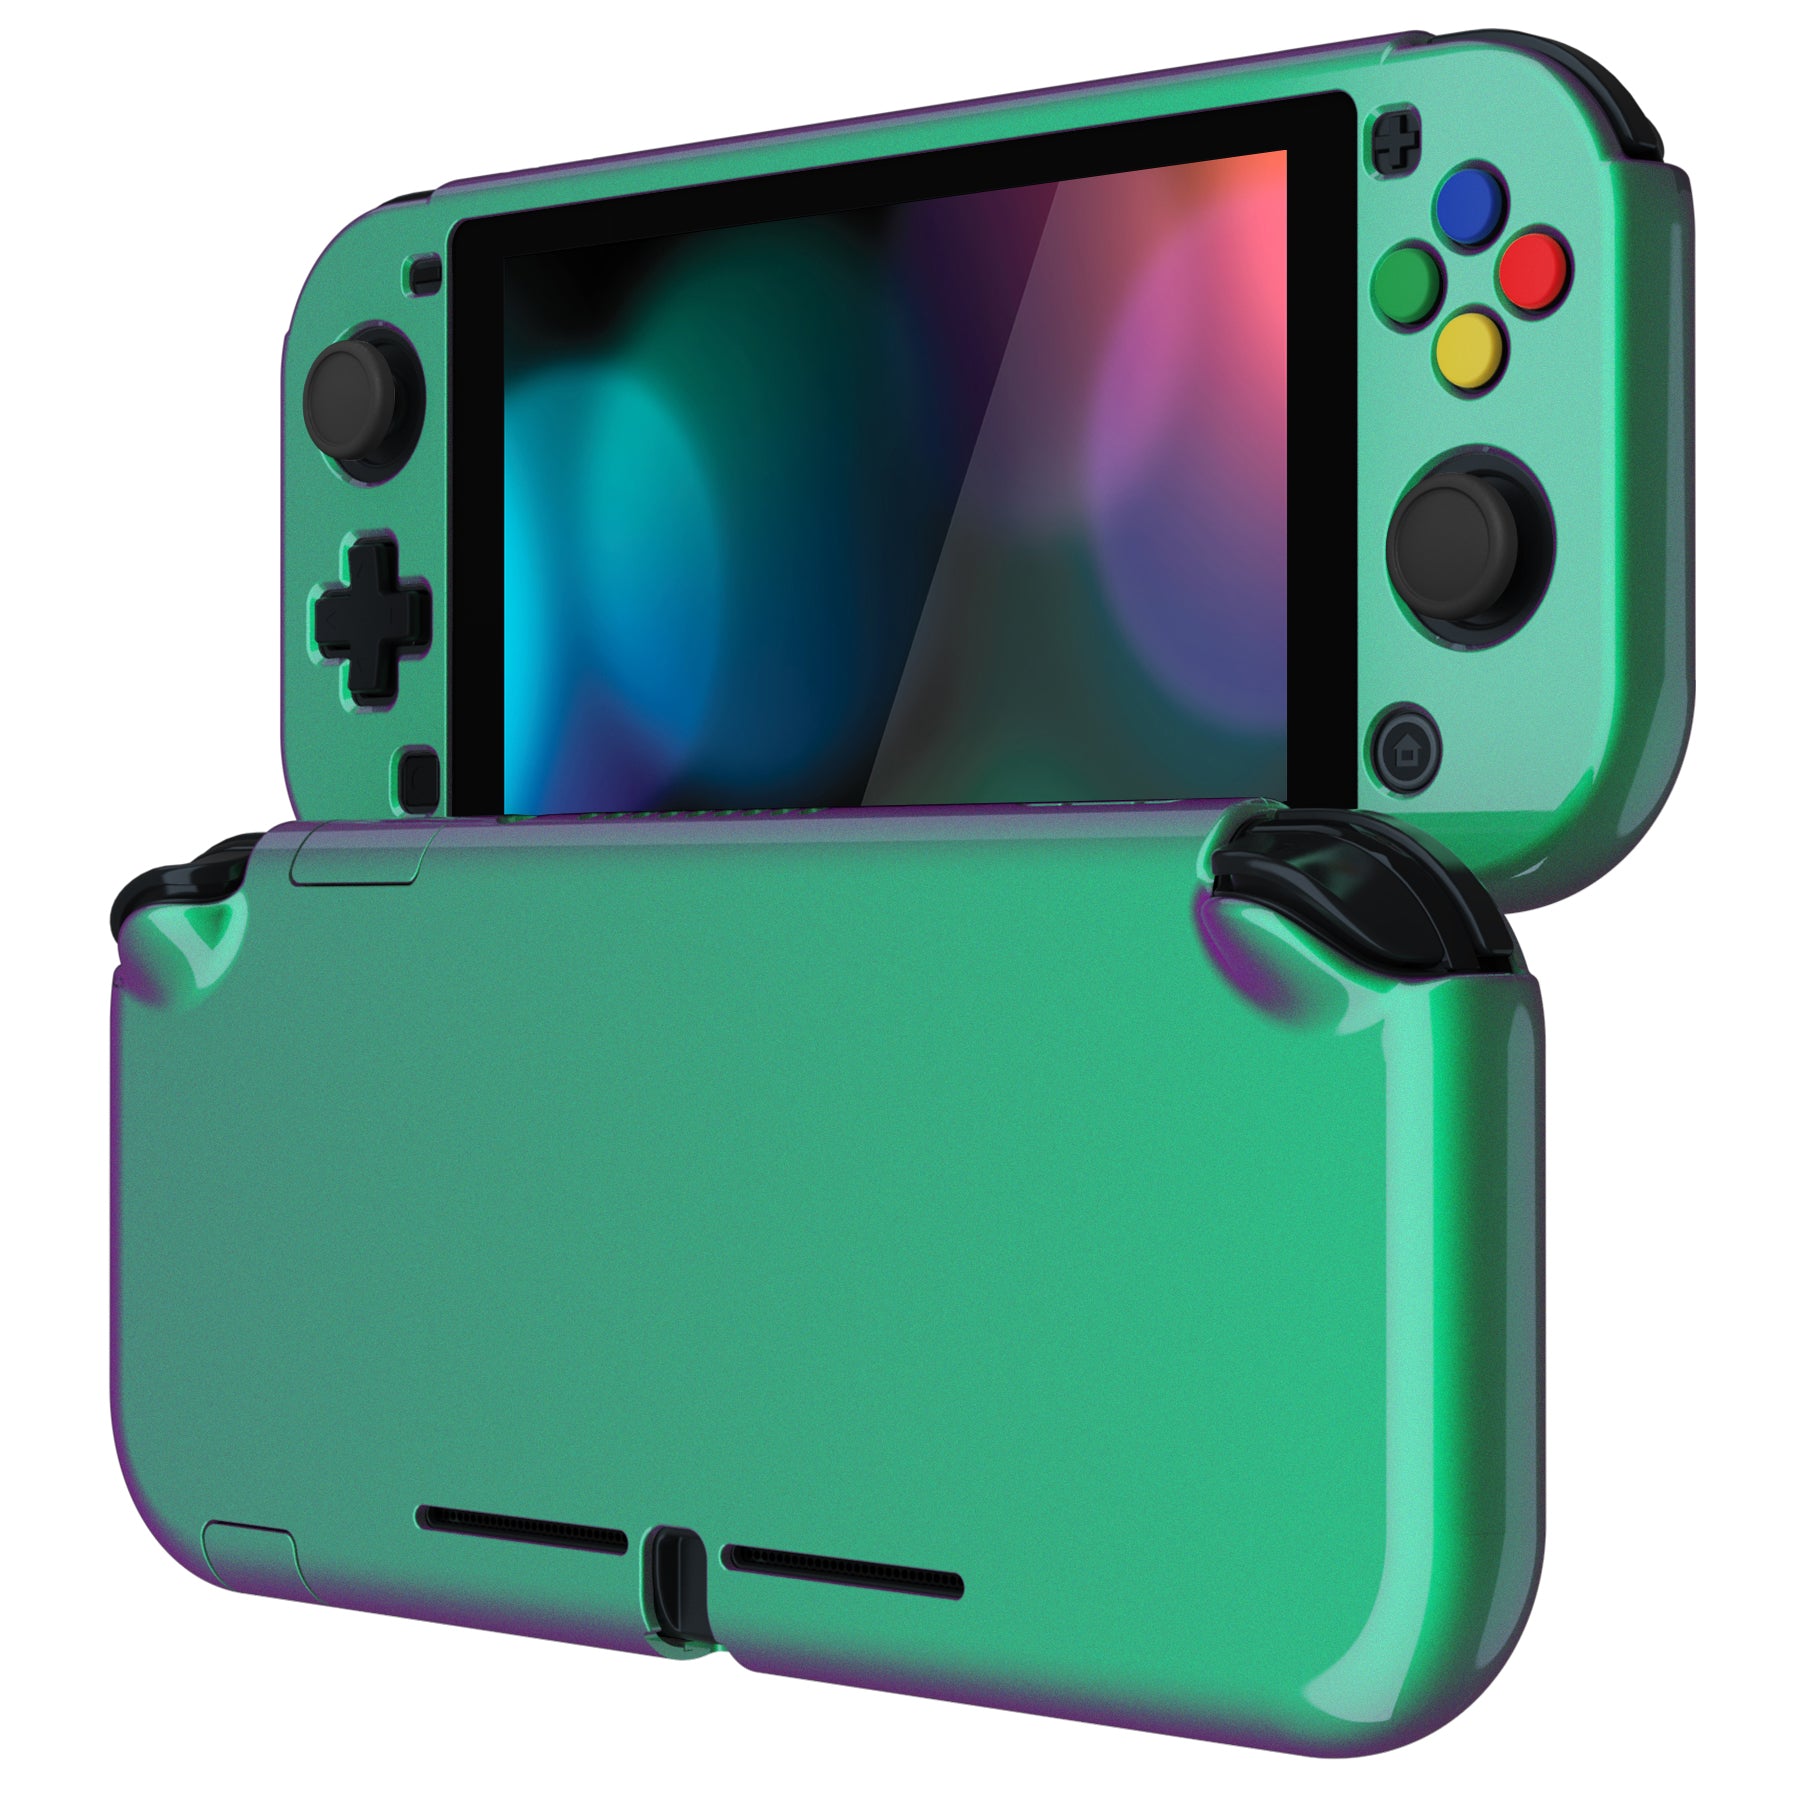 PlayVital Customized Protective Grip Case for Nintendo Switch Lite, Glossy  Chameleon Green Purple Hard Cover Protector for Nintendo Switch Lite - 1 x